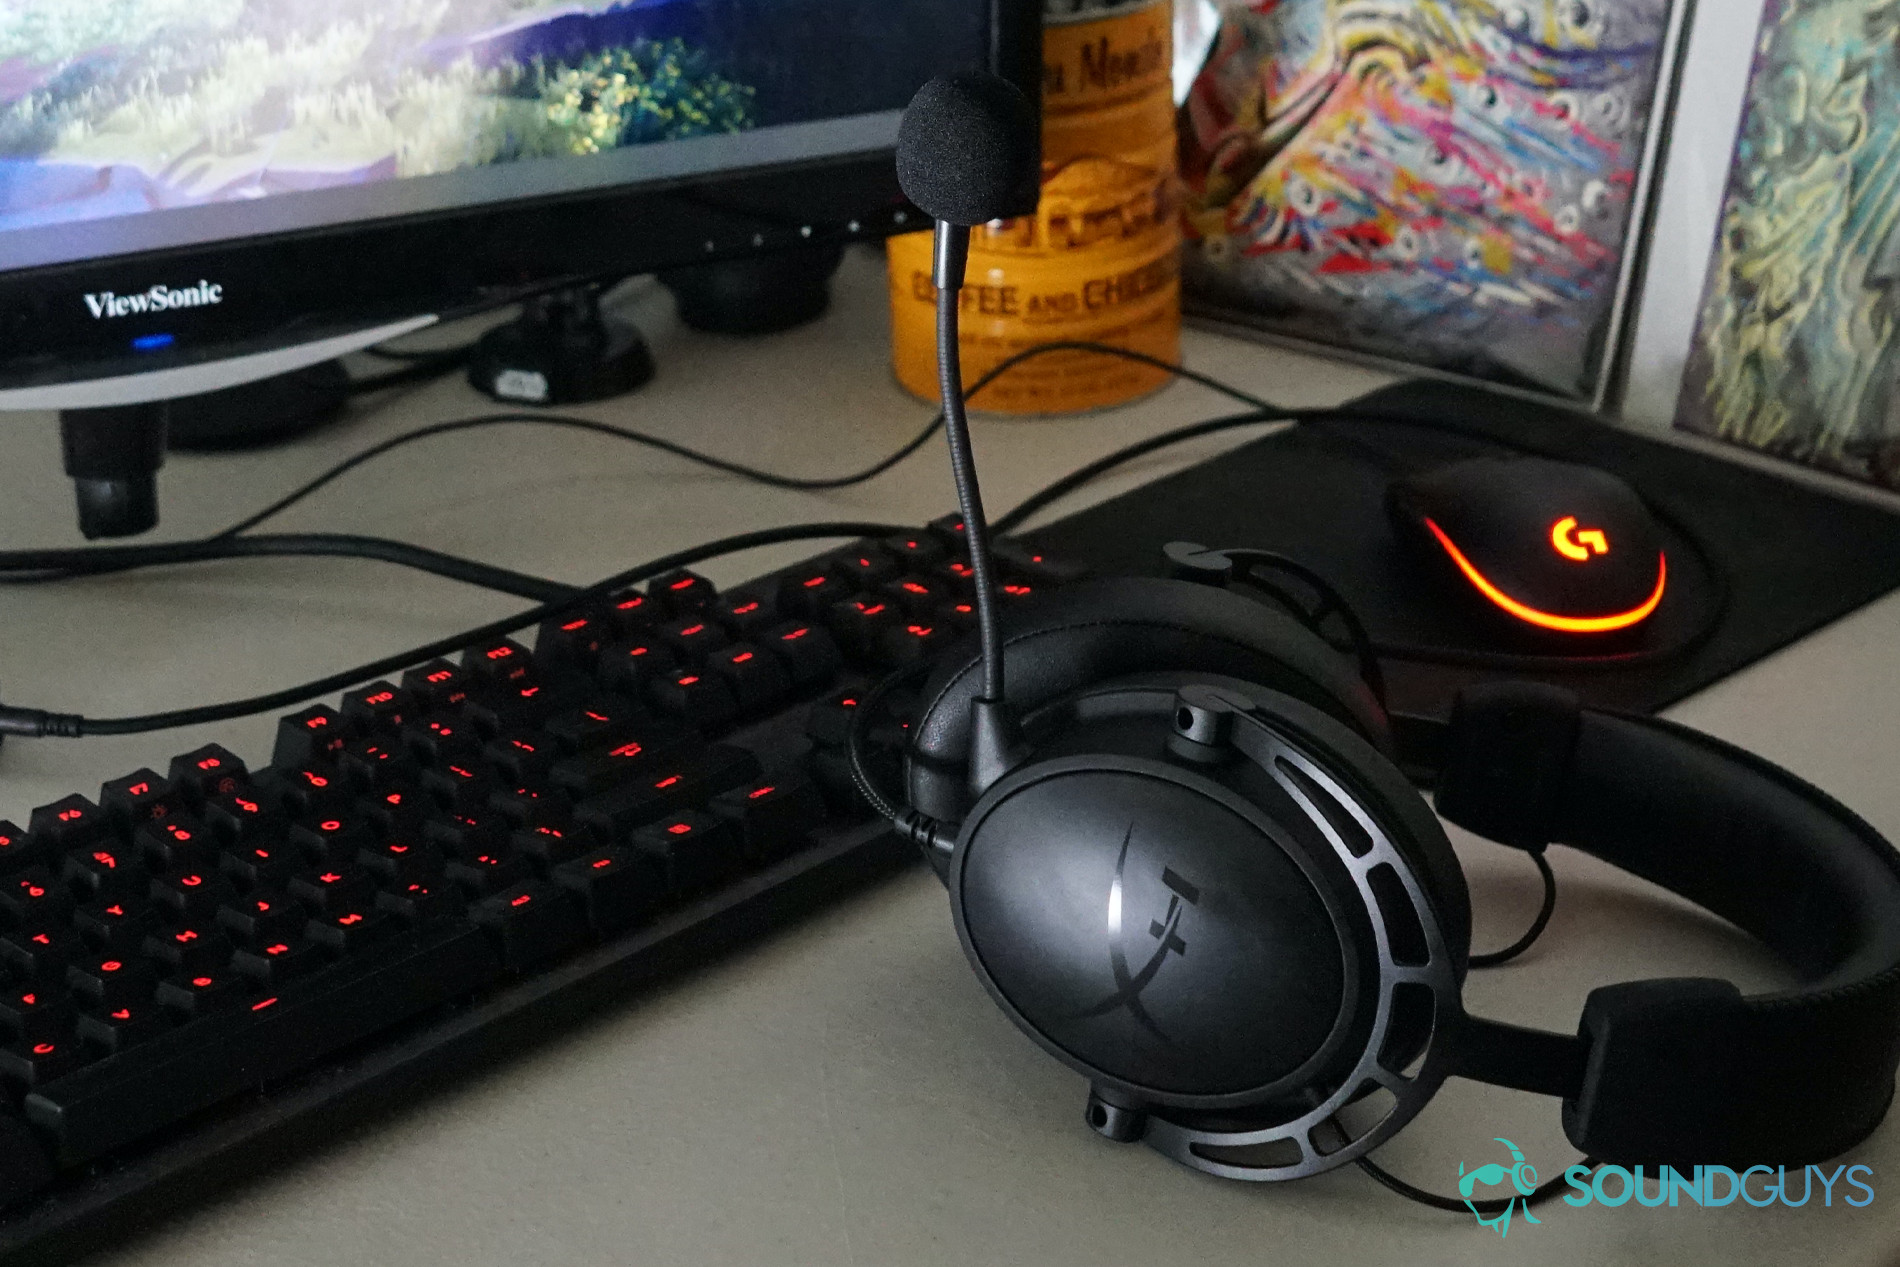 The HyperX Cloud Alpha S sits in front of a gaming PC, in front of a Logitech mouse and gaming keyboard, with tin for Cafe Du Monde coffee and a painting of the Flash in the background.